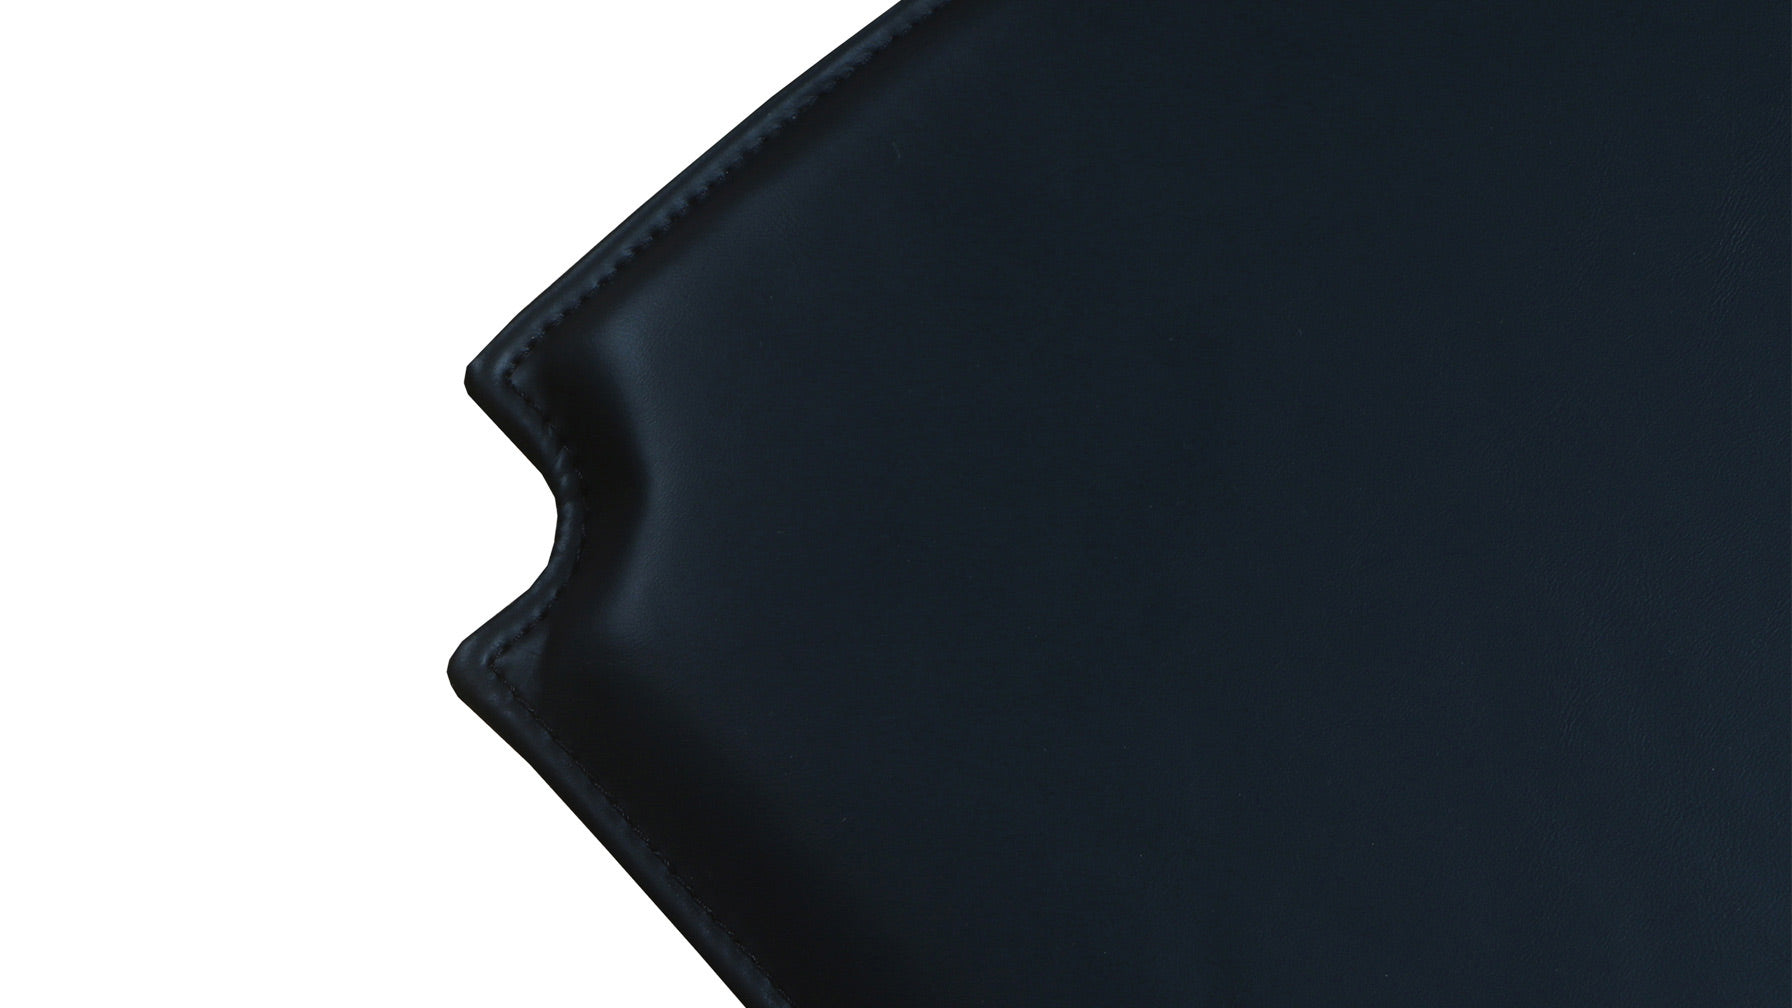 Seat Cushion - Tuck In Dining Chair, Black - Image 7